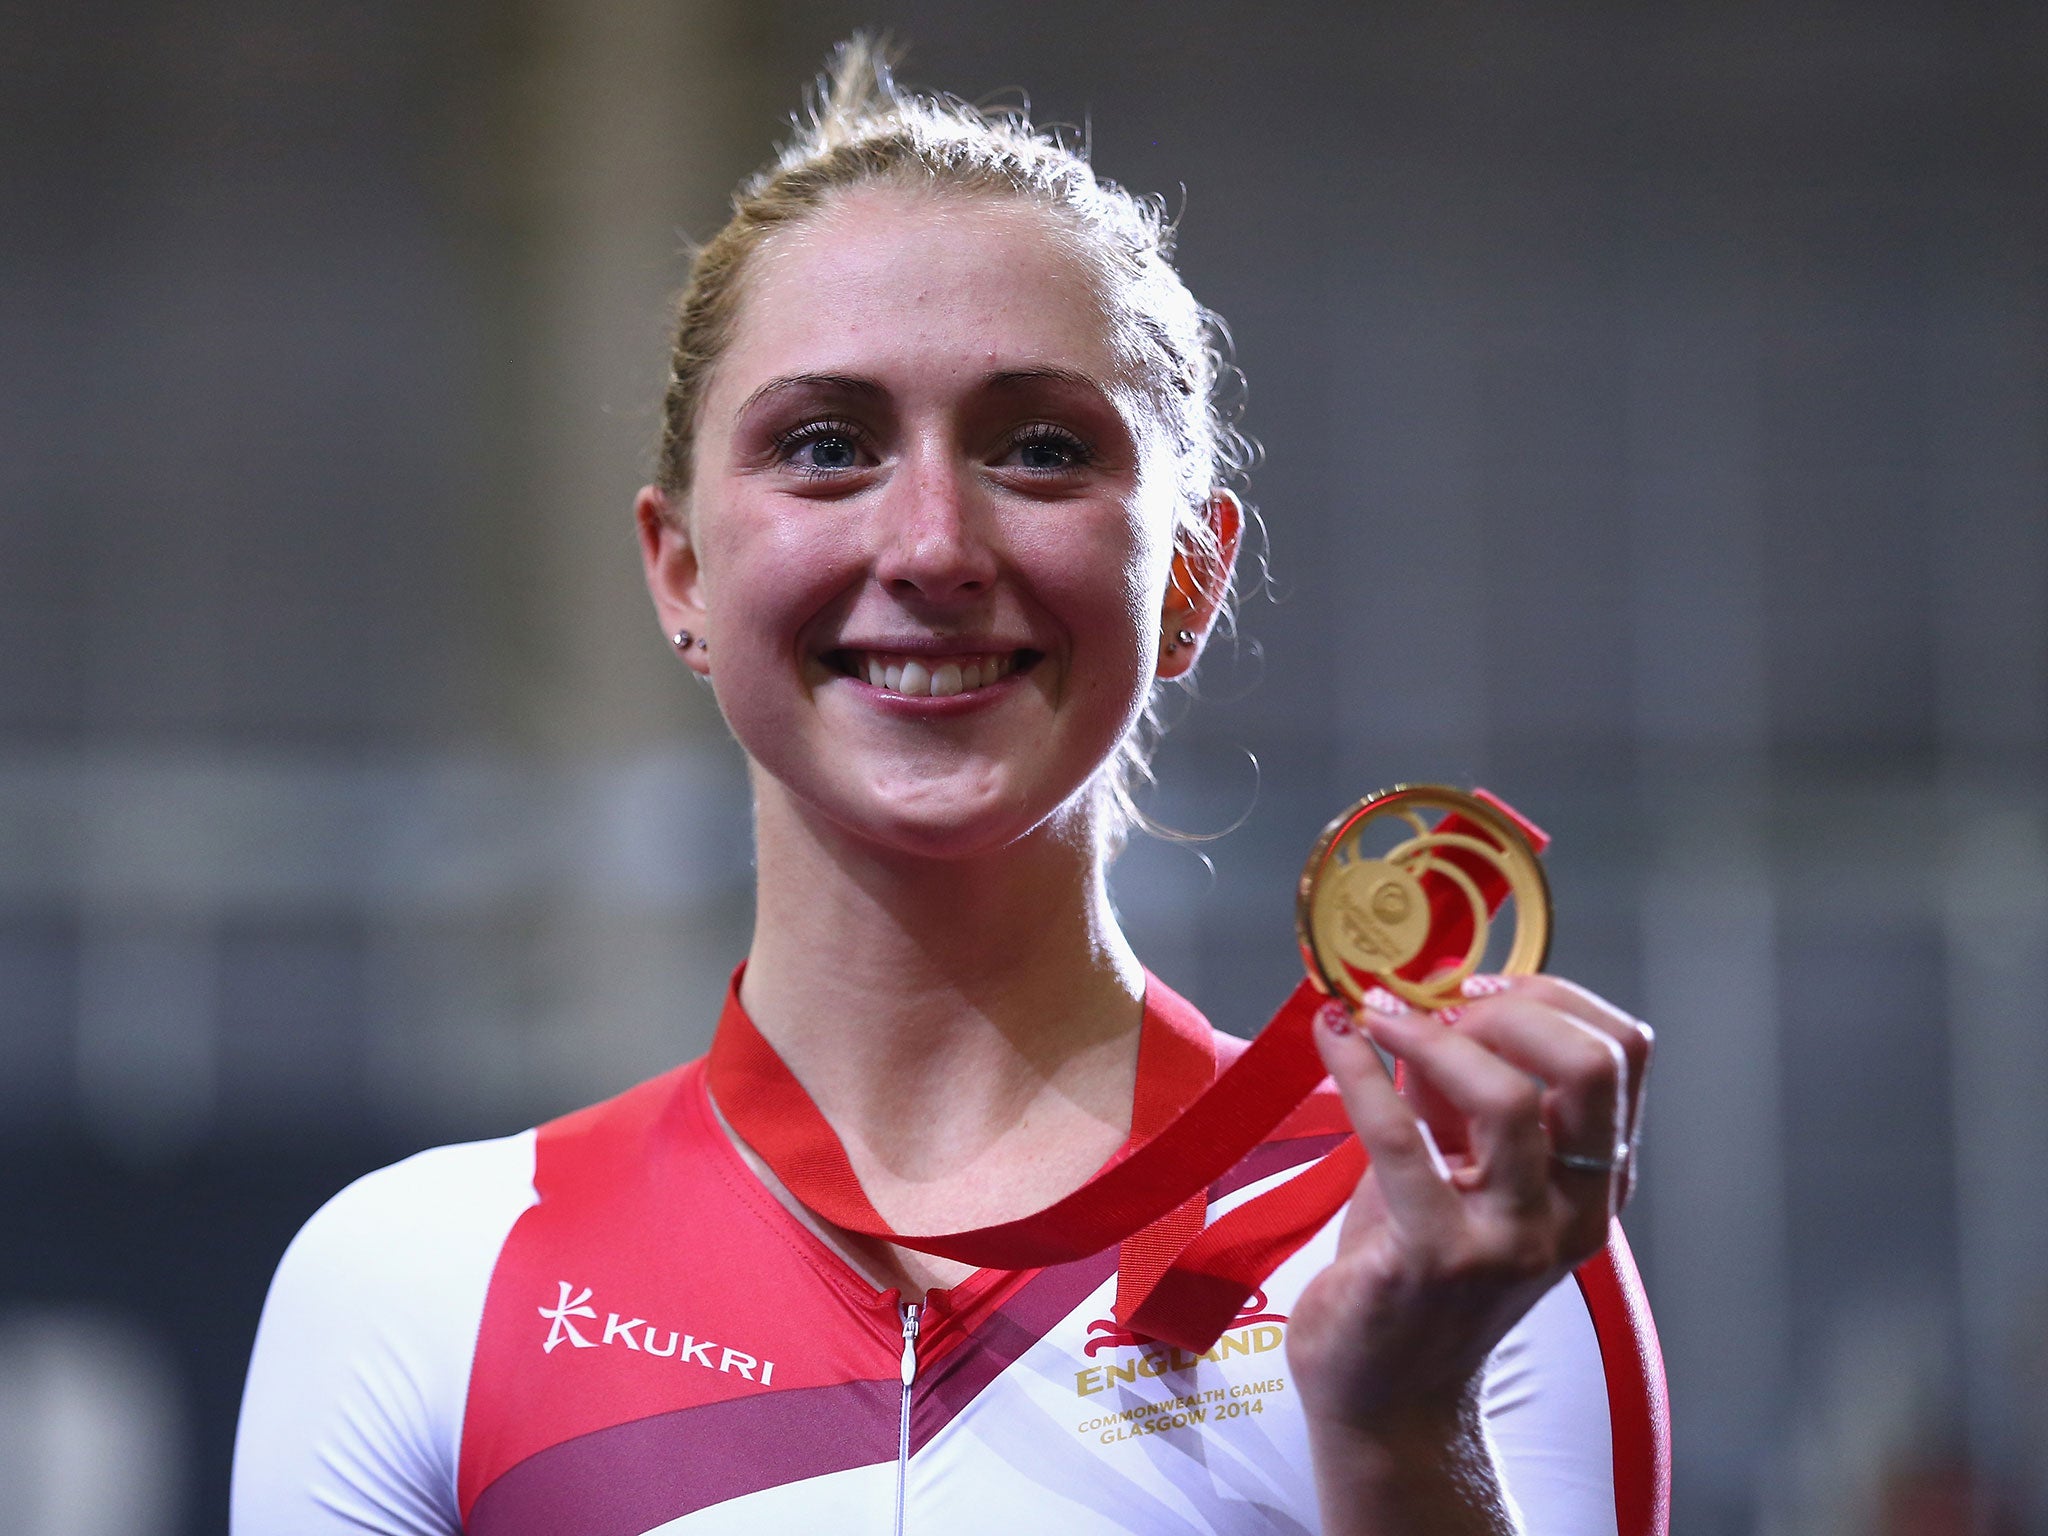 Laura Trott with her gold